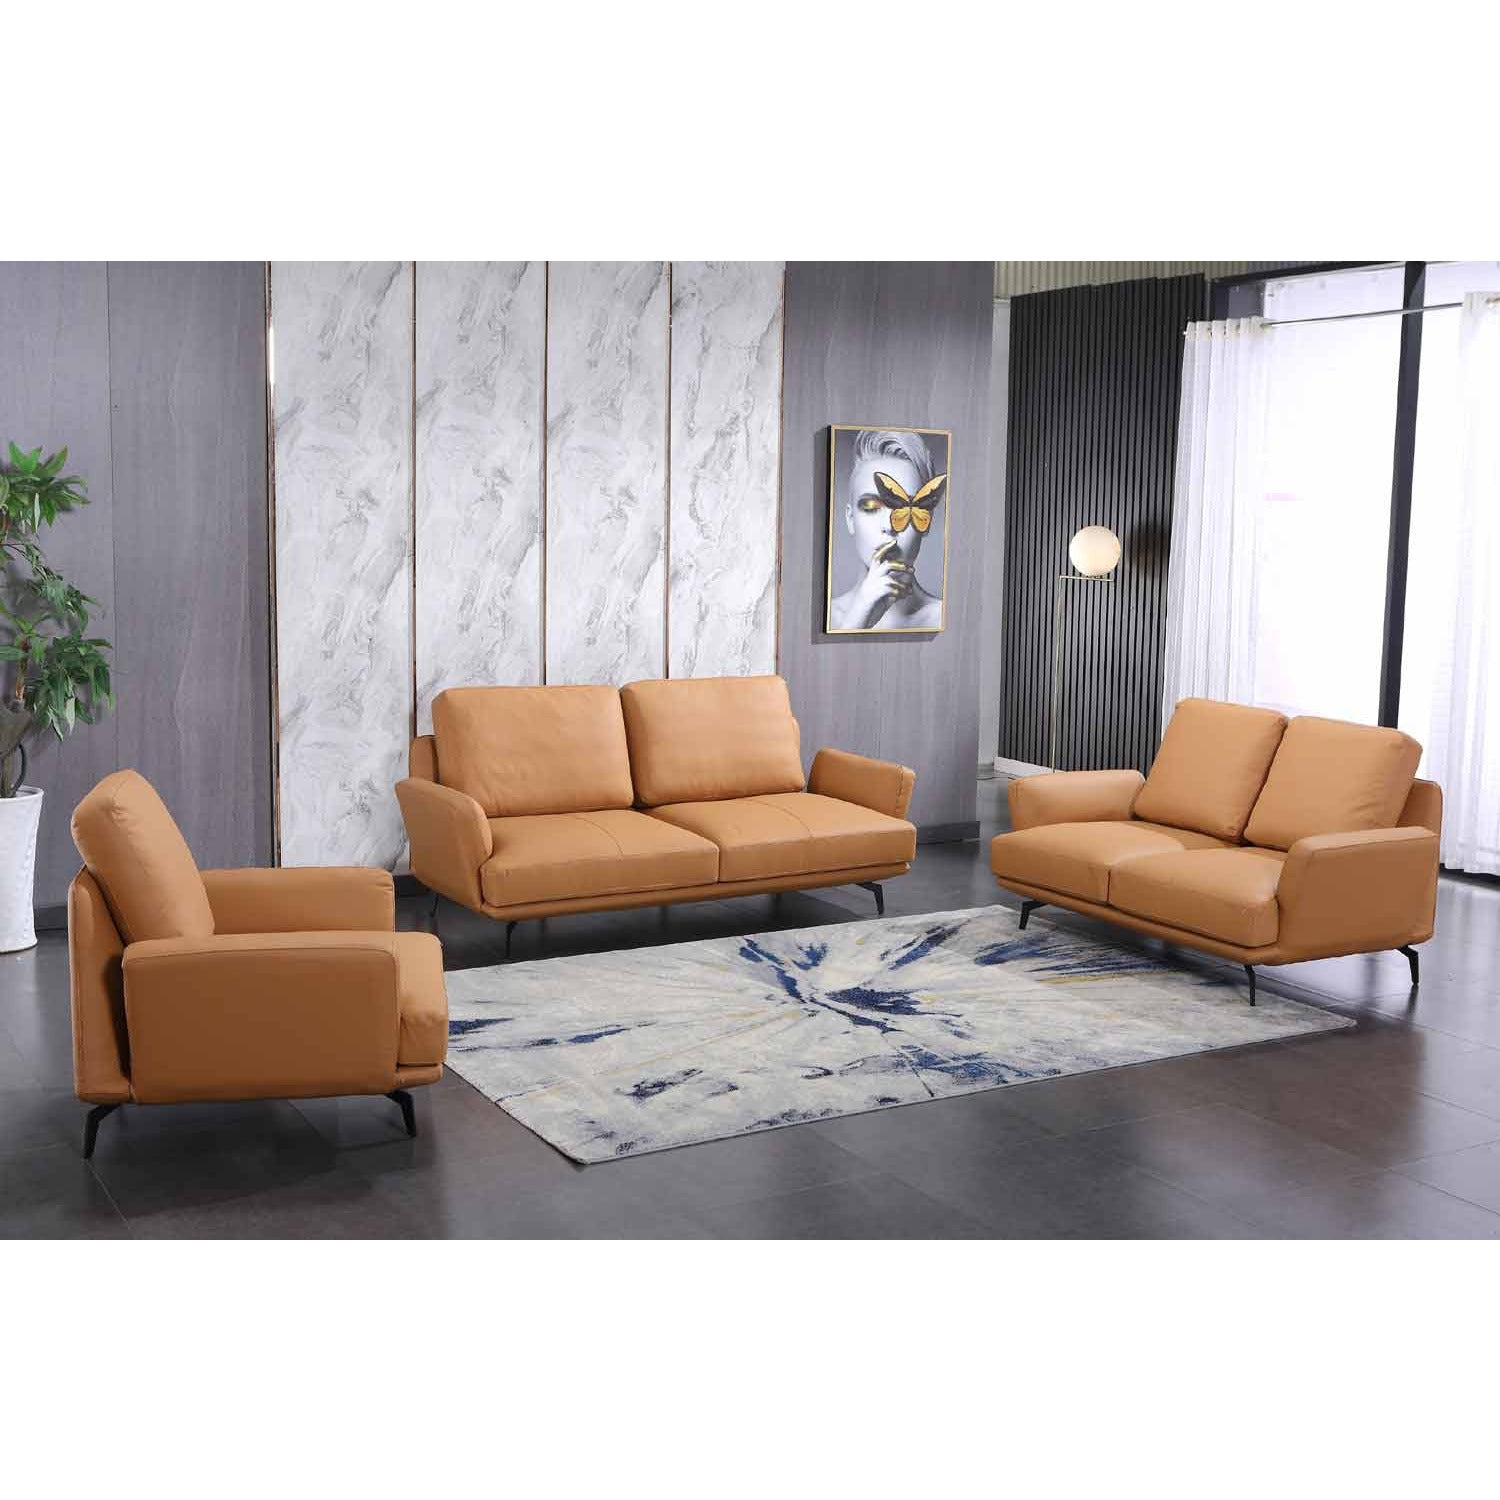 European Furniture - Tratto 3 Piece Living Room Set in Cognac - 37457-3SET - New Star Living